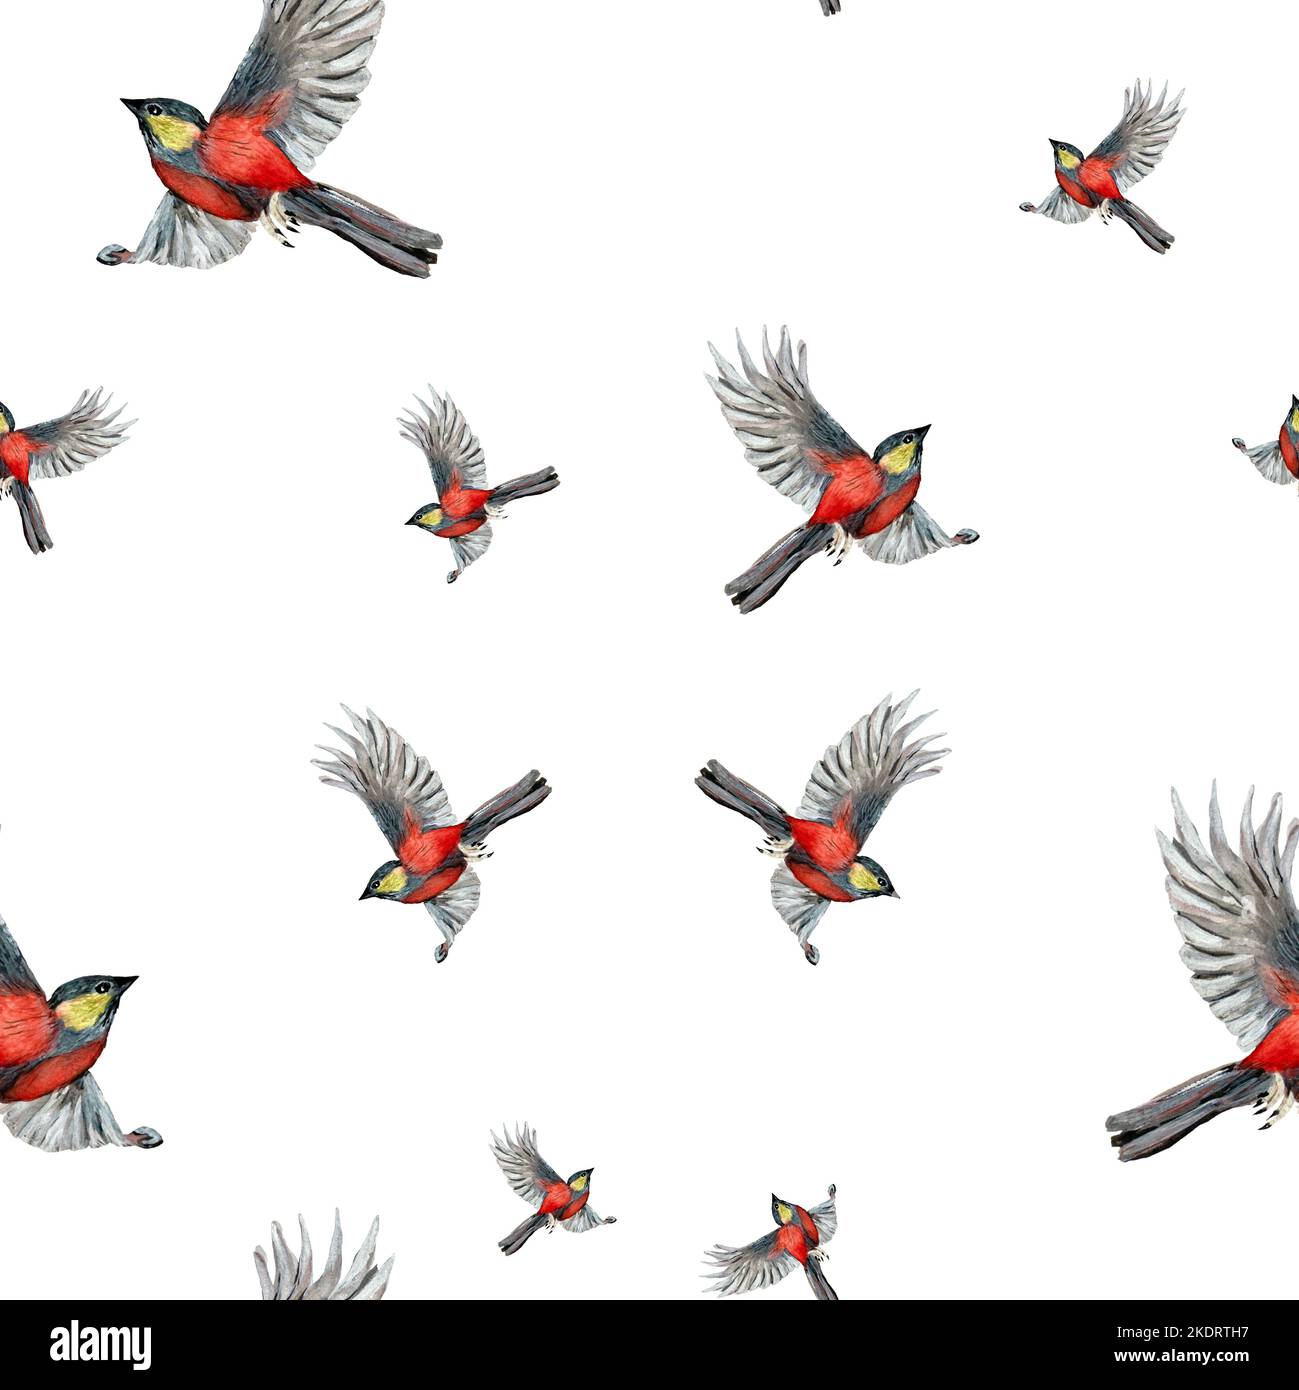 Bird flying red pattern a watercolor illustration Stock Photo